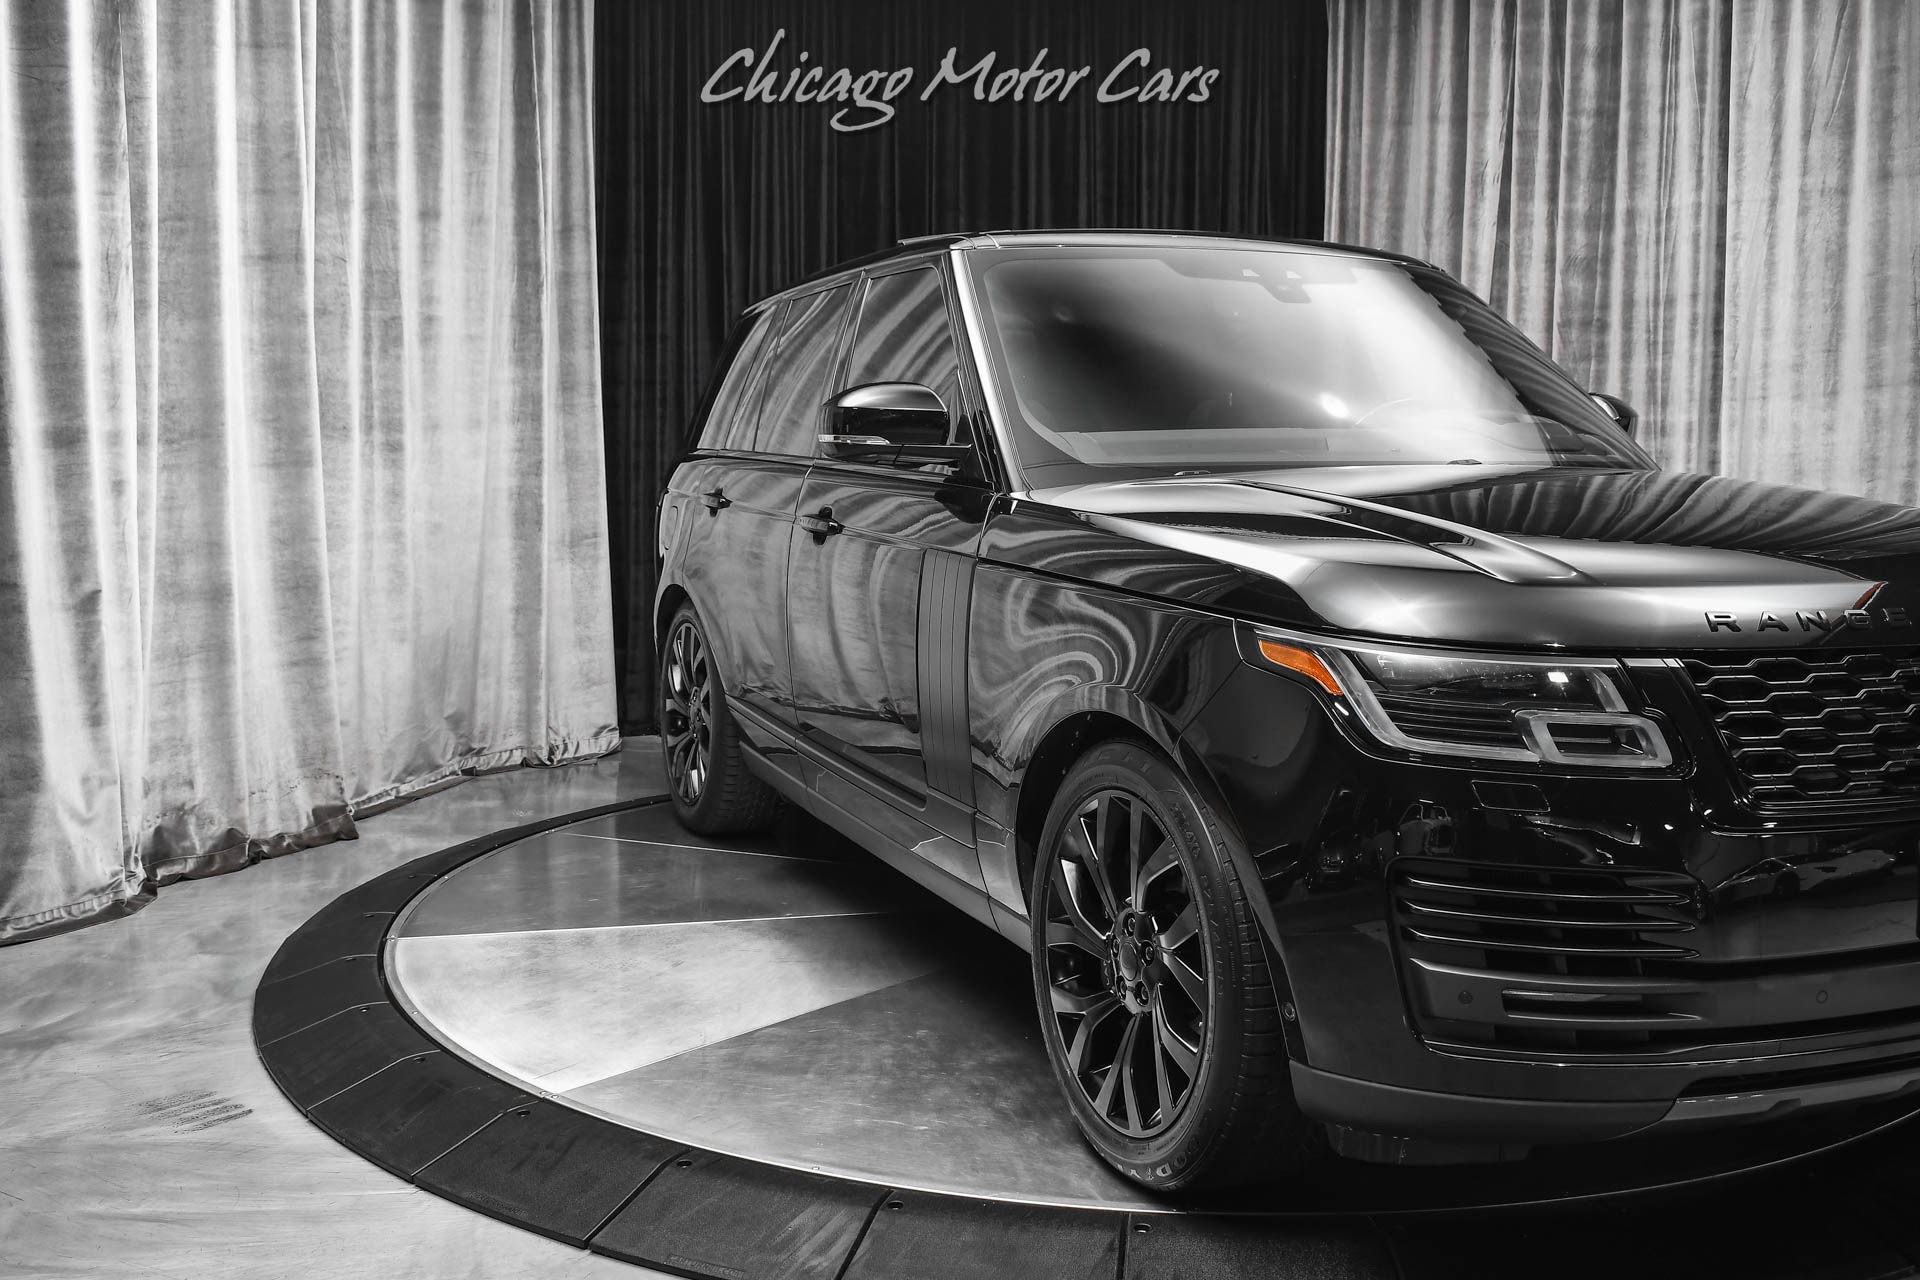 Used-2019-Land-Rover-Range-Rover-HSE-SUV-LOW-Miles-Driver-Assist-Pack-Vision-Assist-Pack-LOADED